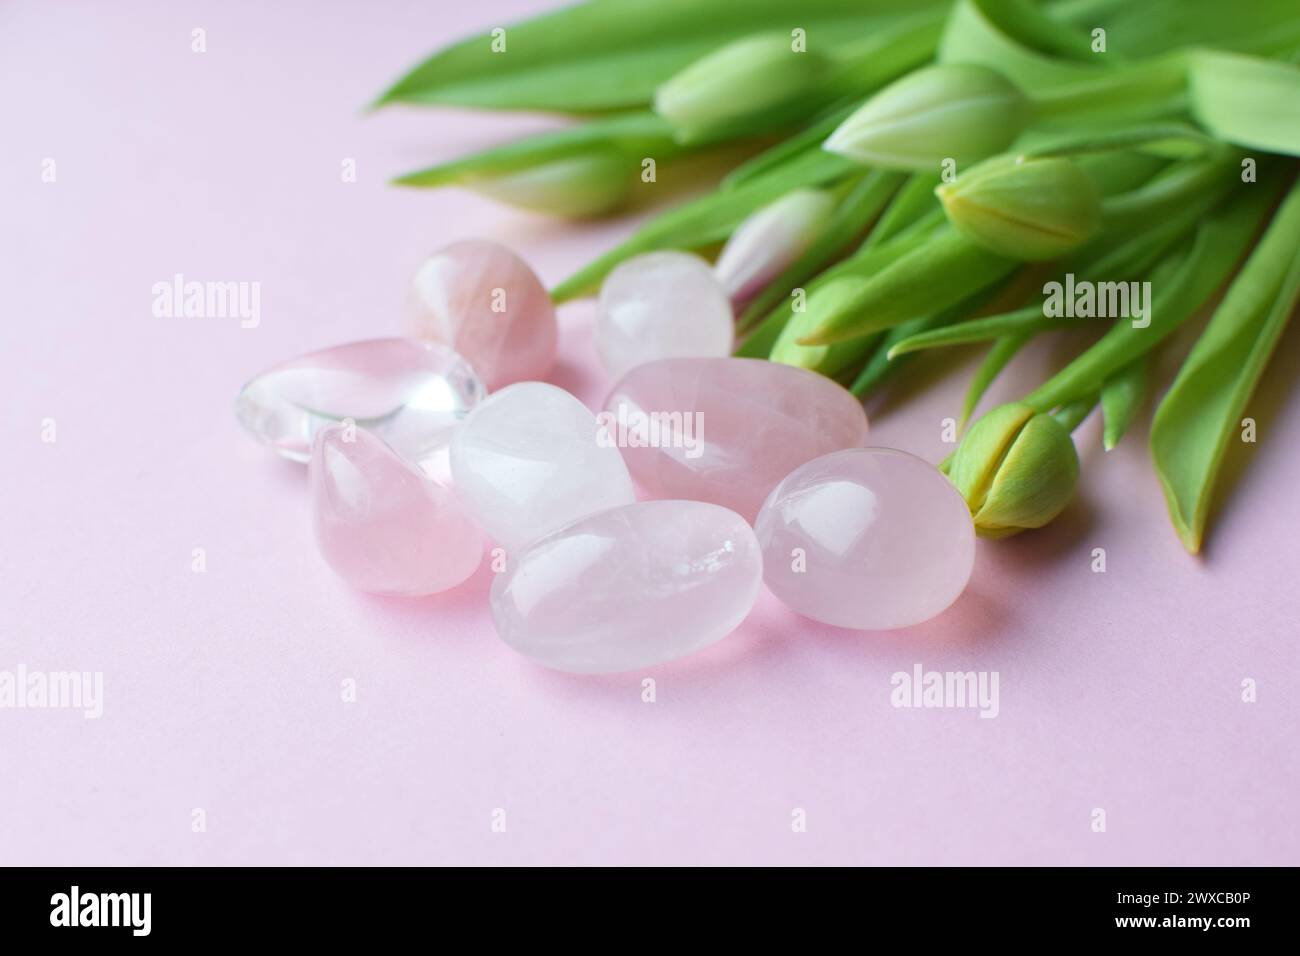 Rose quartz crystals and a bouquet of green tulip buds. Healing crystals, the magic of precious stones. Stock Photo